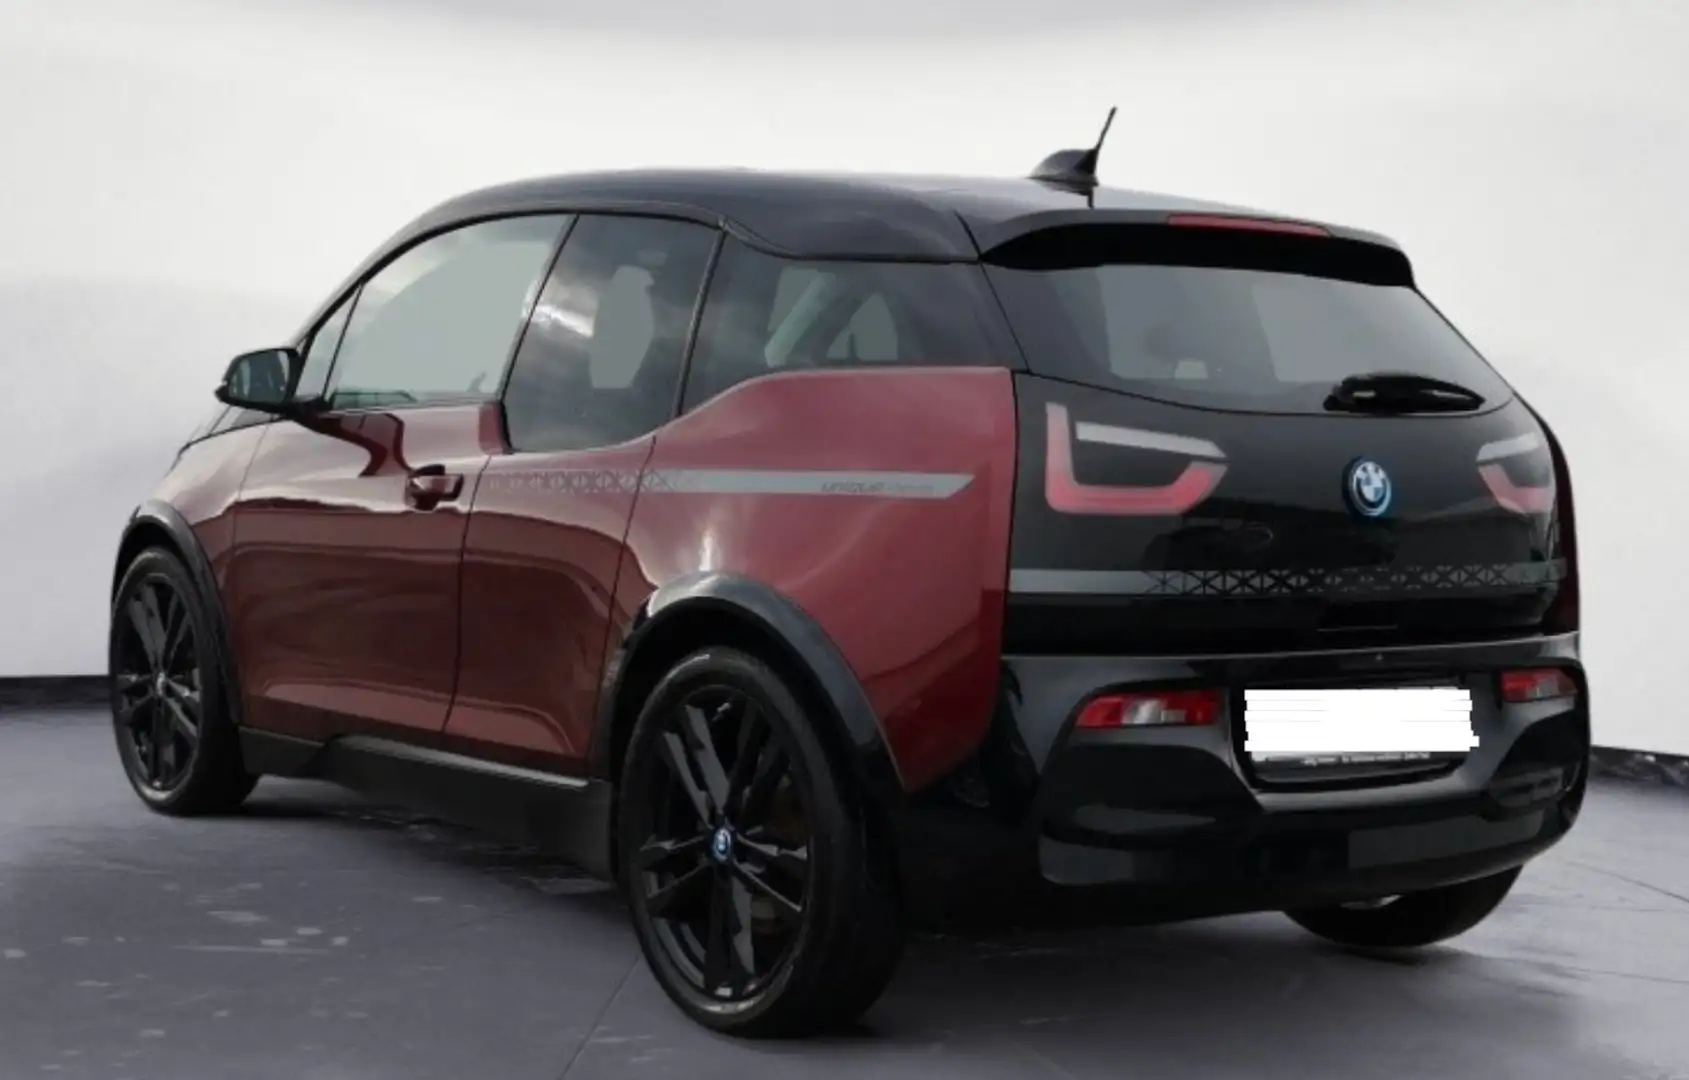 BMW i3 i3s 120Ah UNIQUE FOREVER EDITION - 1 OF 2000 Czerwony - 2